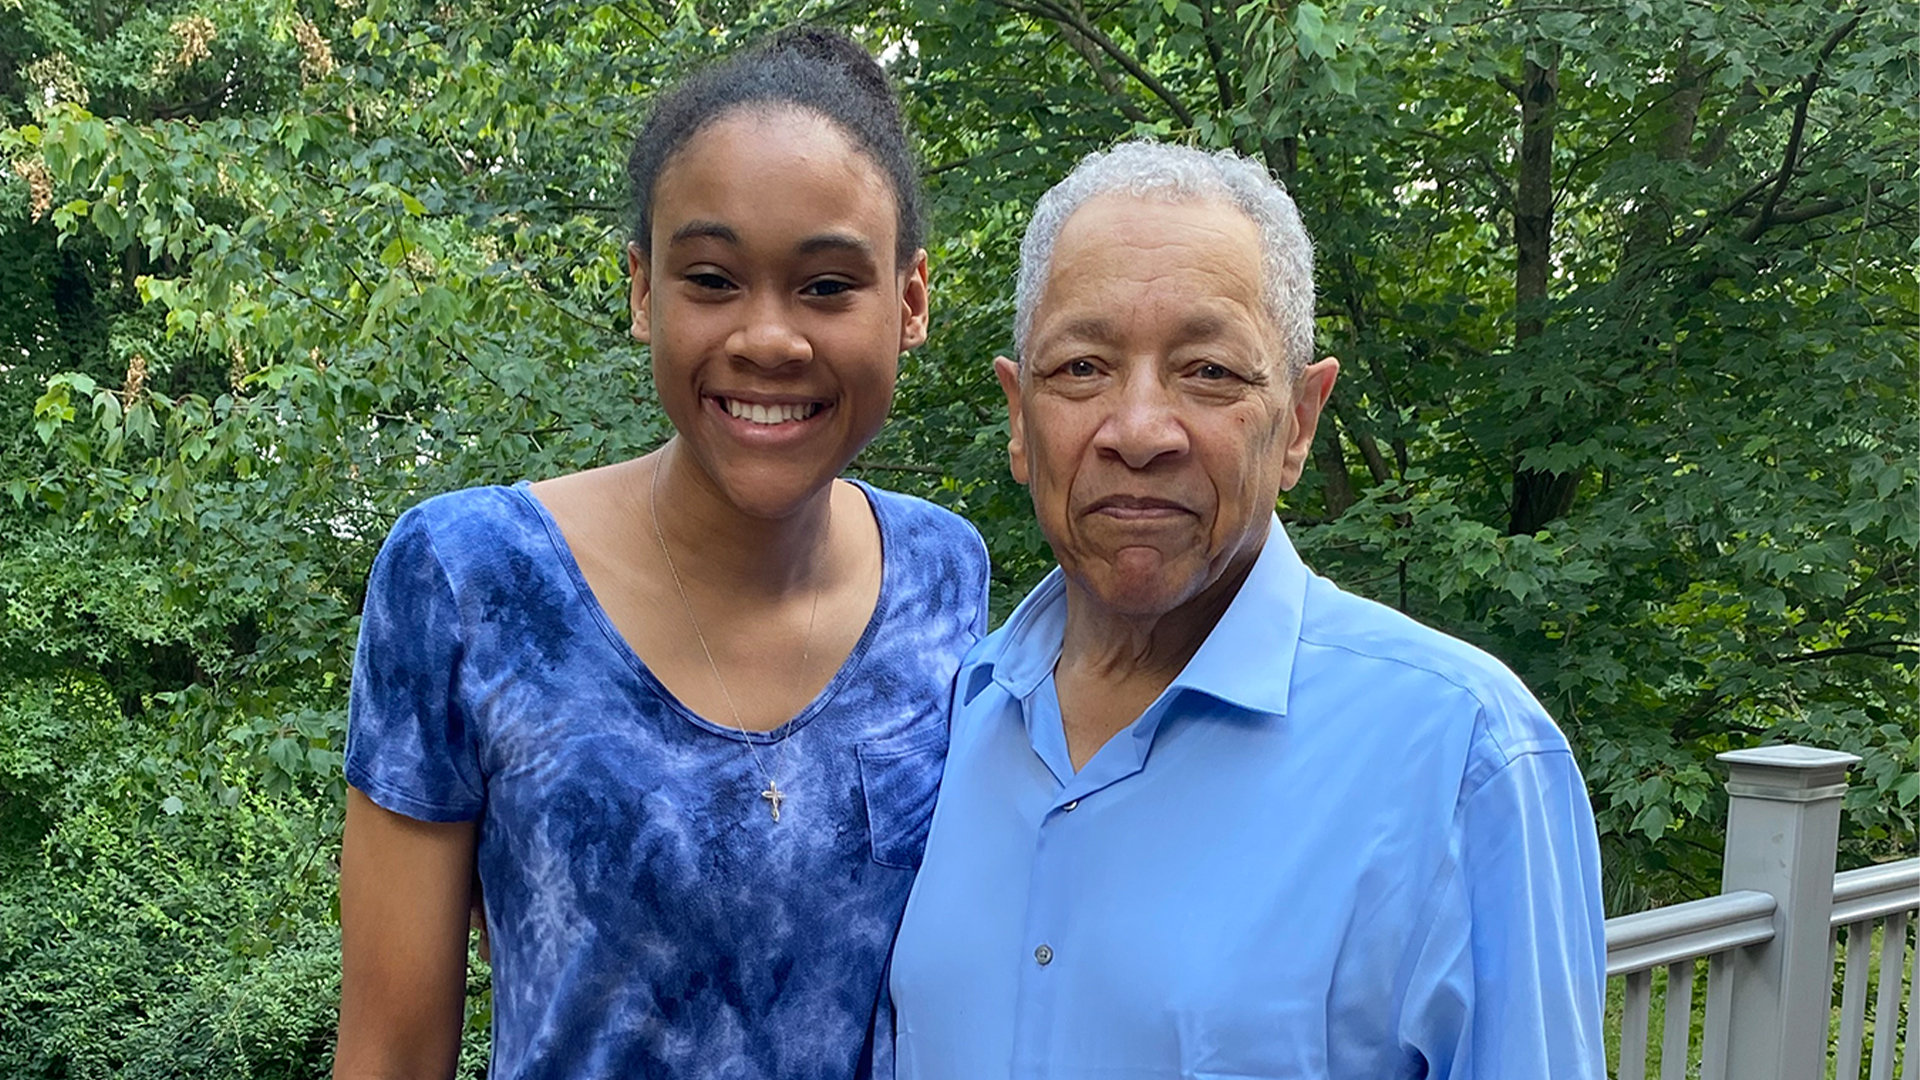 Georgia Tech’s First Black Graduate, Ronald Yancey, Presents Granddaughter With Diploma For Master's Degree In Electrical And Computer Engineering